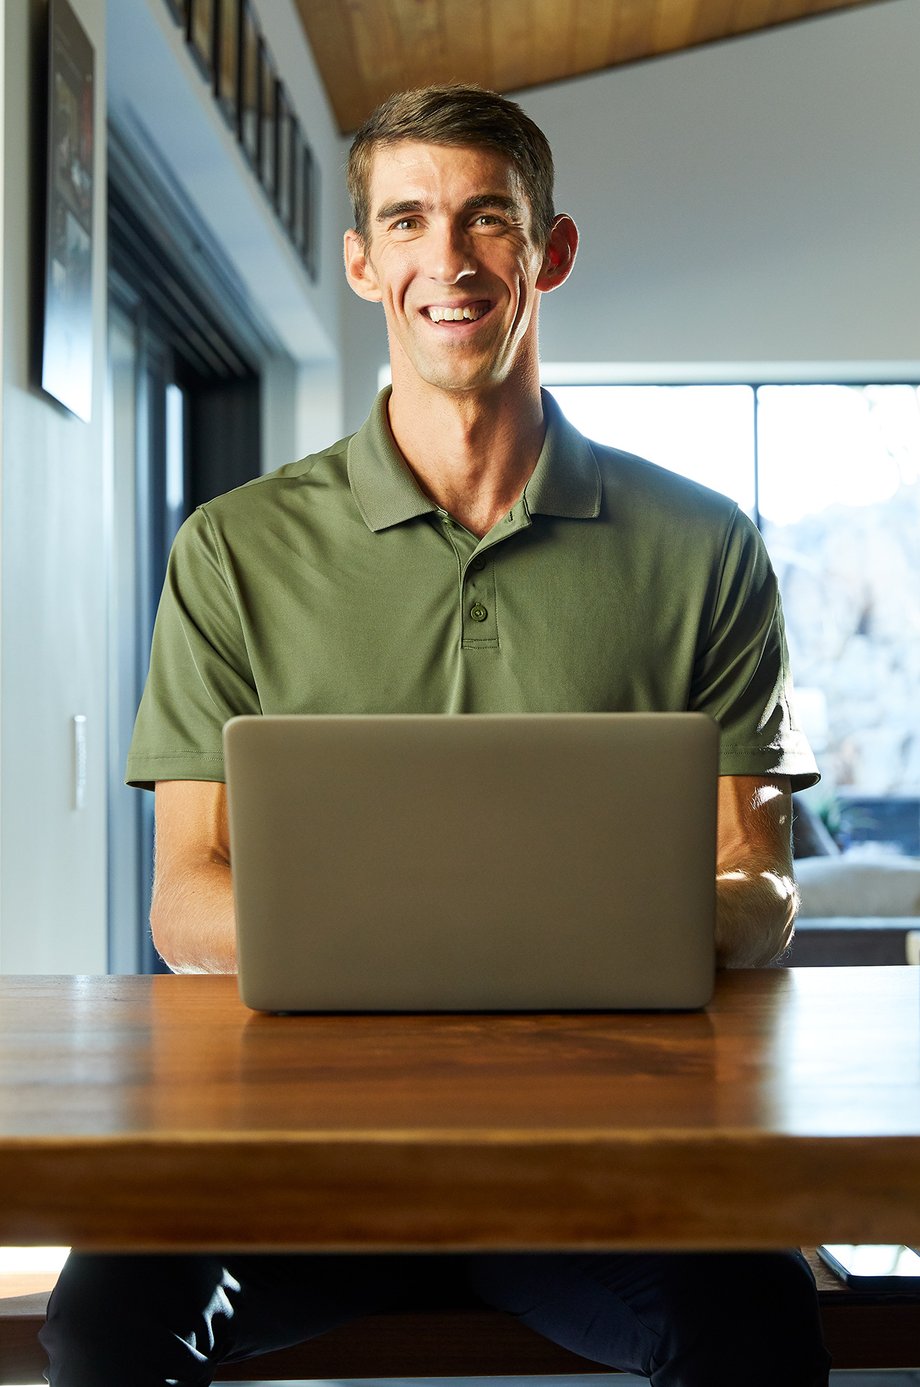 Photograph of Michael Phelps behind a laptop.